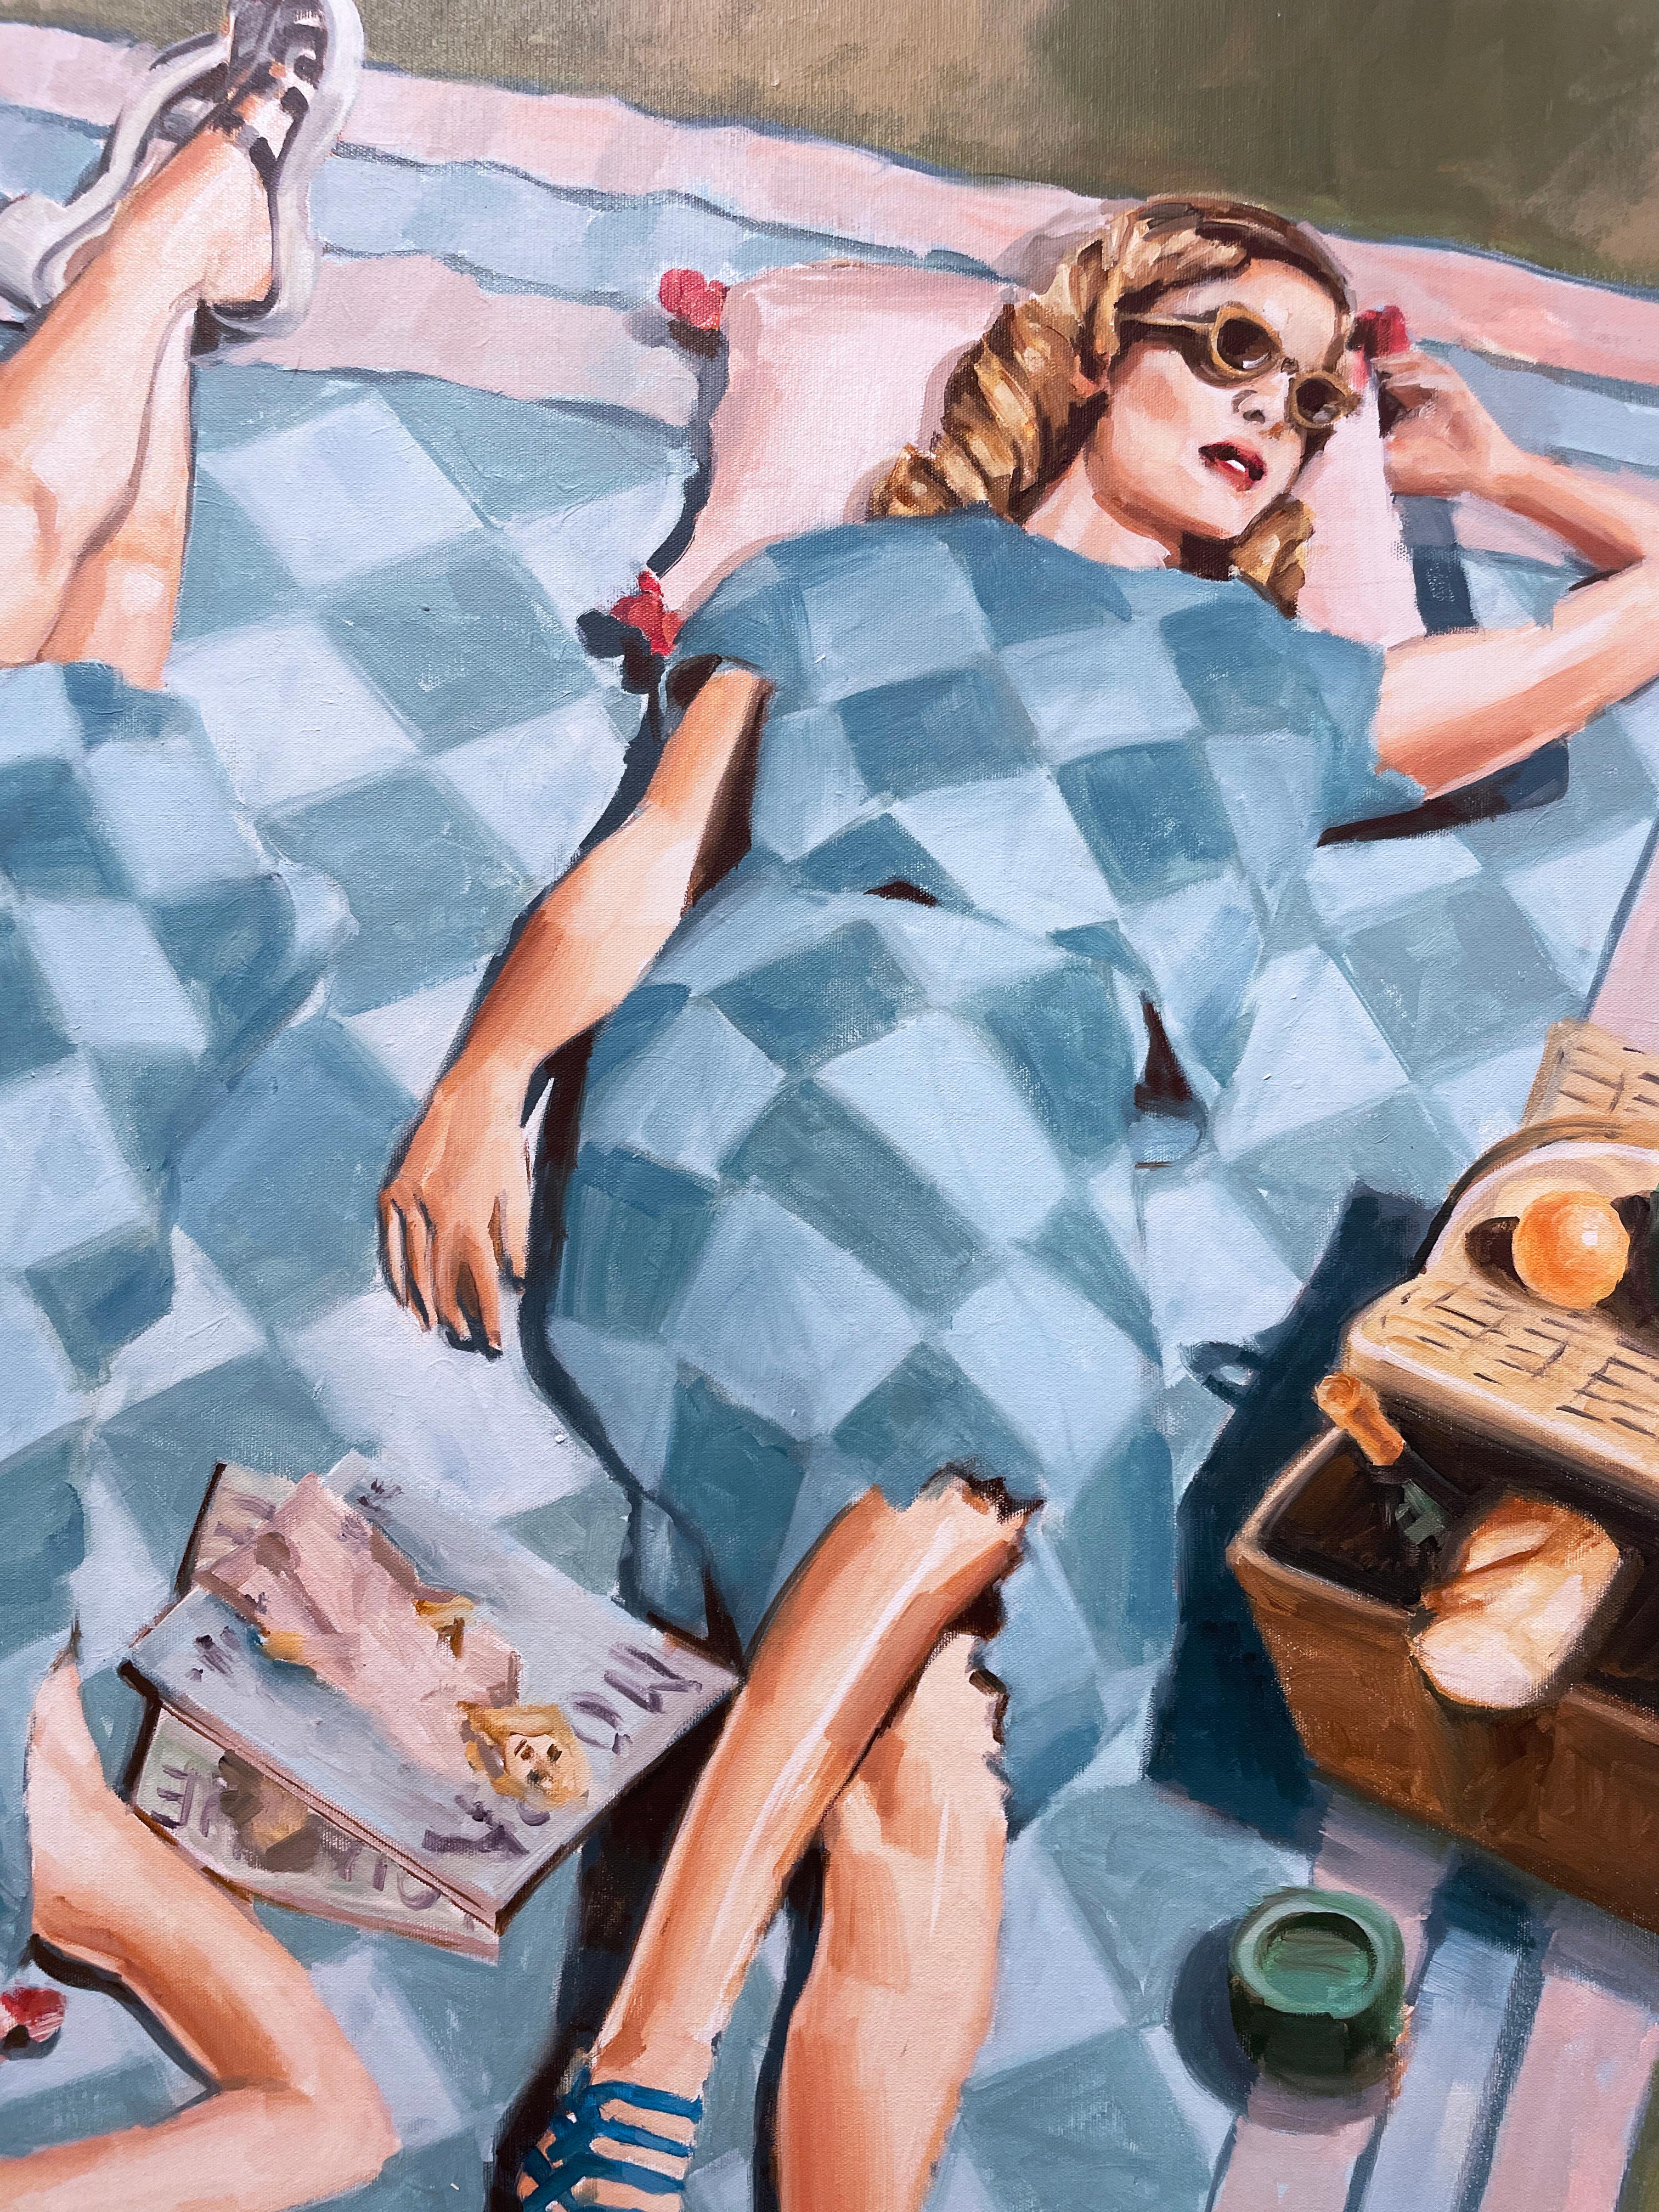 Style Picnic (2022) oil on canvas, figurative, lounging women, patterns, blue 1